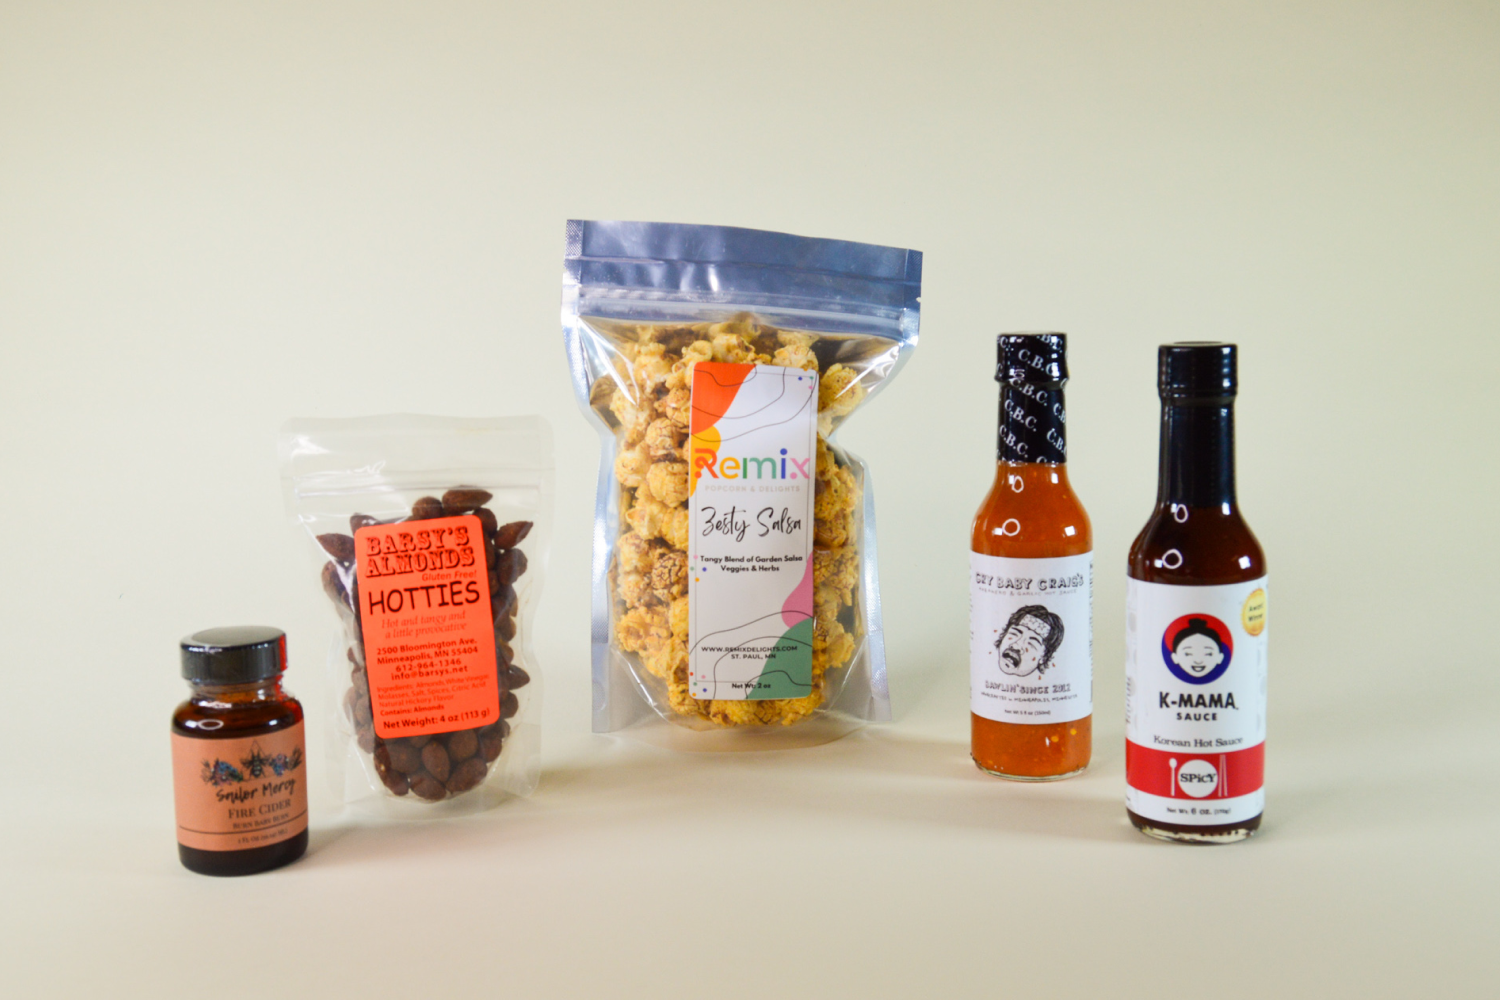 small batch local food gifts small business gifts